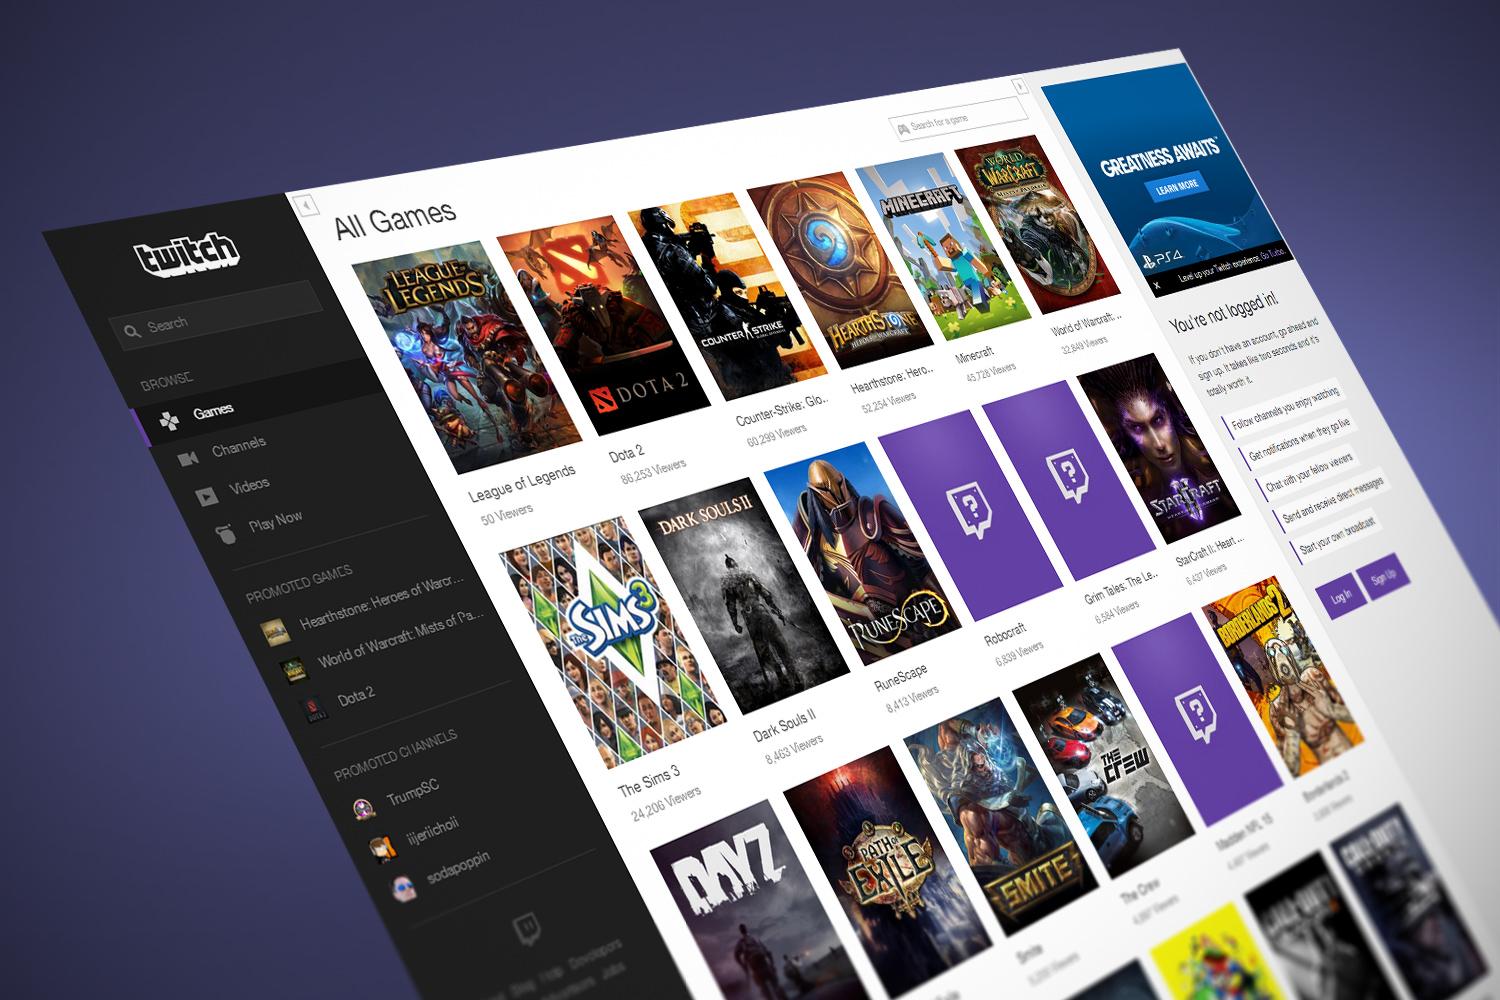 The new Twitch Desktop App is here